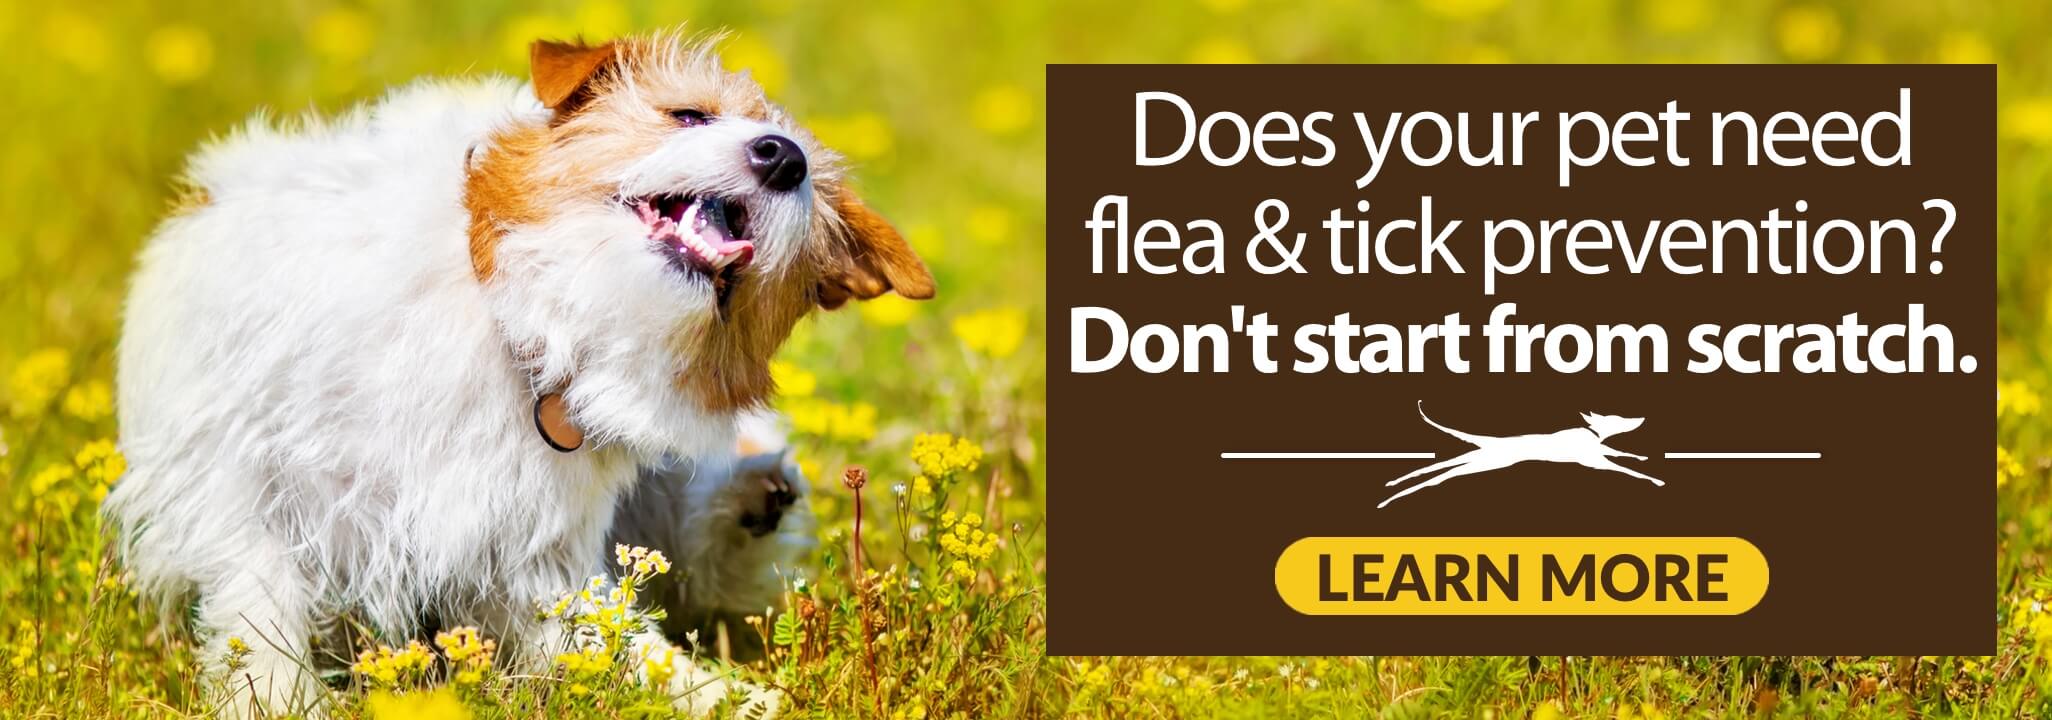 Jack Russell Terrier scratching behind ear with caption Does your pet need flea & tick prevention? Don't start from scratch. Learn More